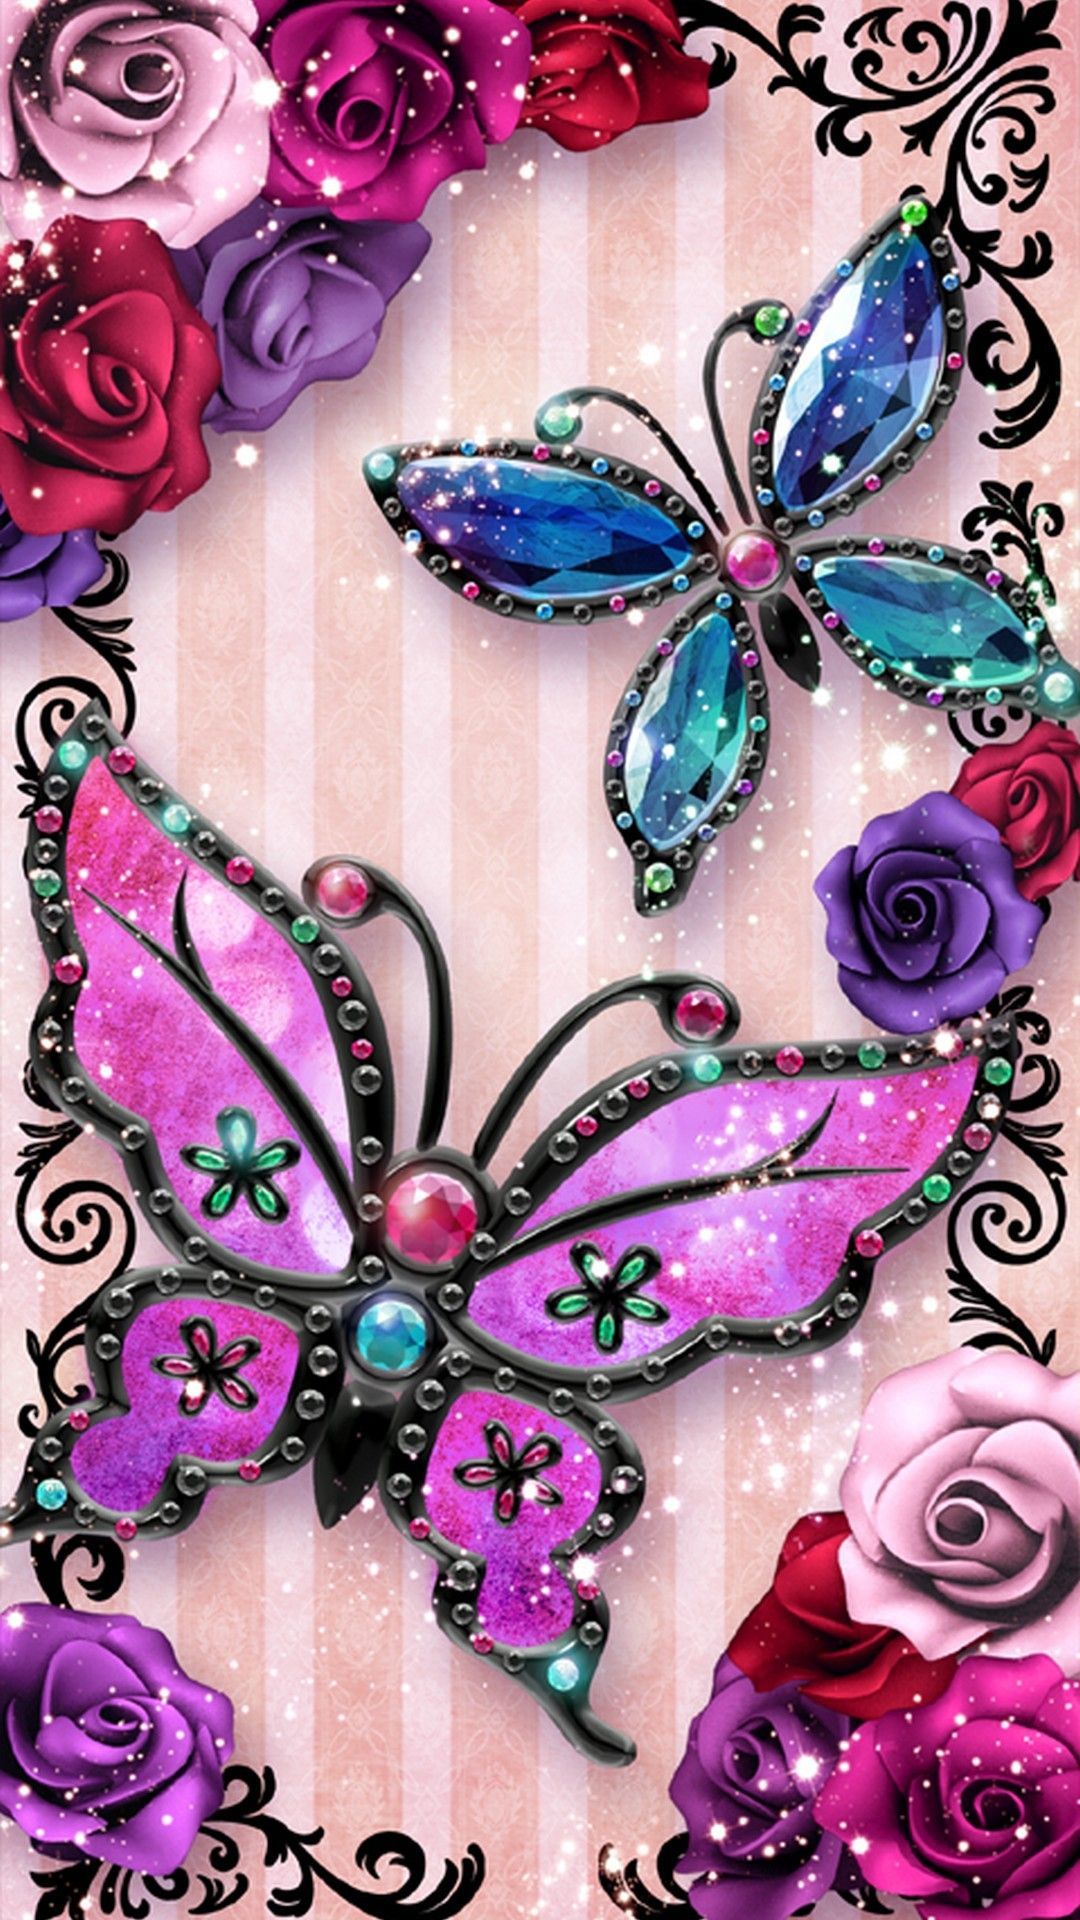 Visit site to download wallpaper cute for iphone background, Cute Butterfly iPhone 6 Wallpaper 2019. Pink wallpaper iphone, Butterfly wallpaper, Cute butterfly